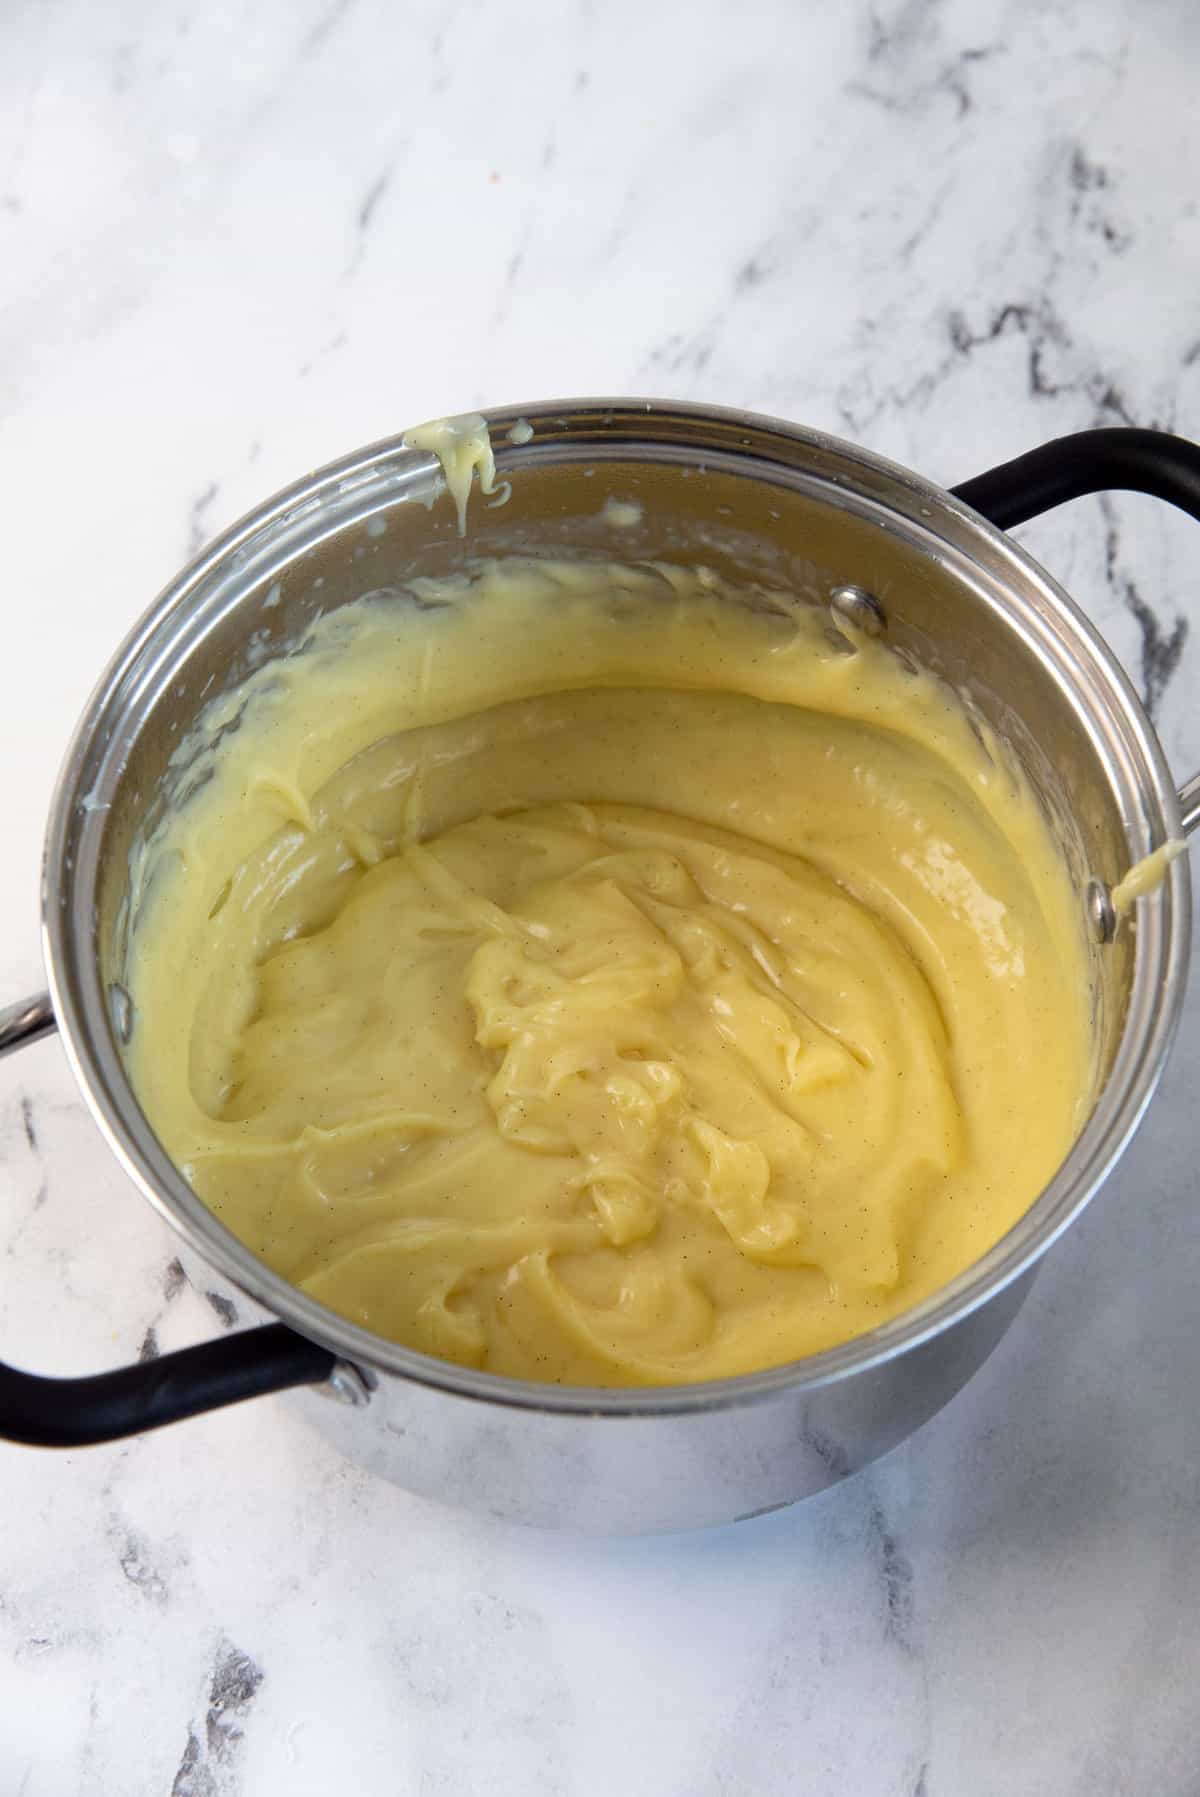 Pastry cream in a saucepan, after thickened and cooked through.